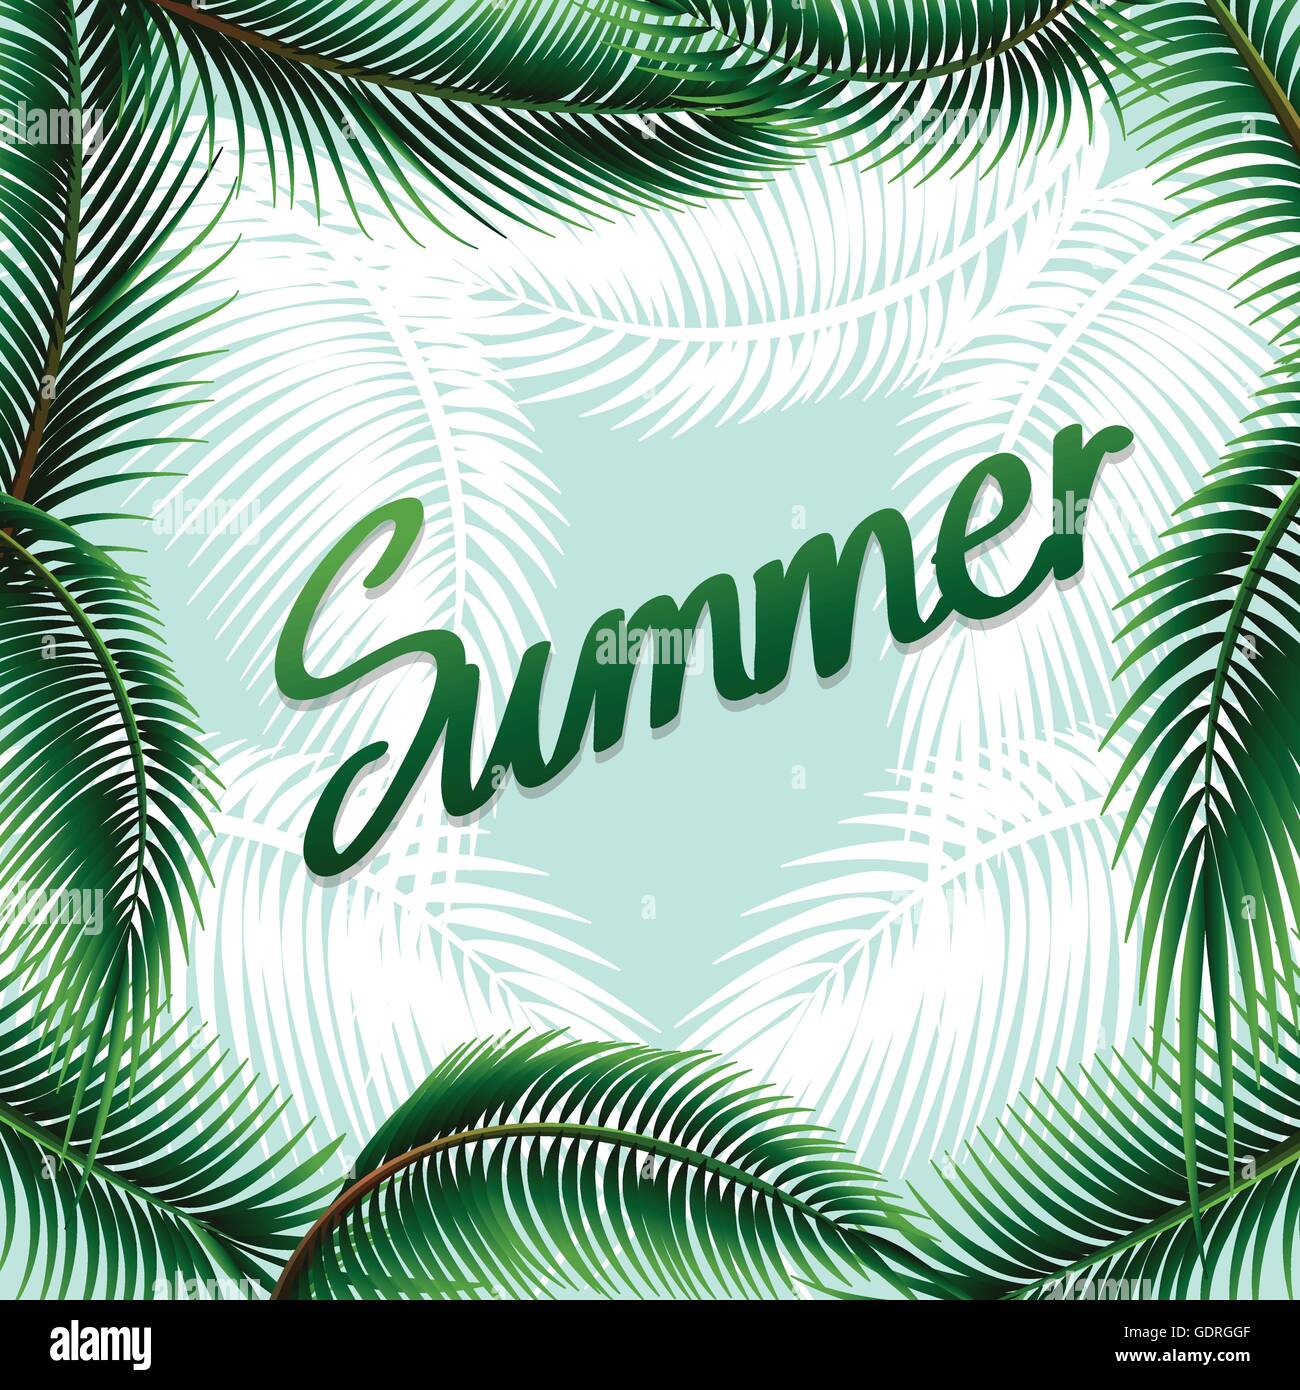 Summer theme background with green leaves illustration Stock Vector ...